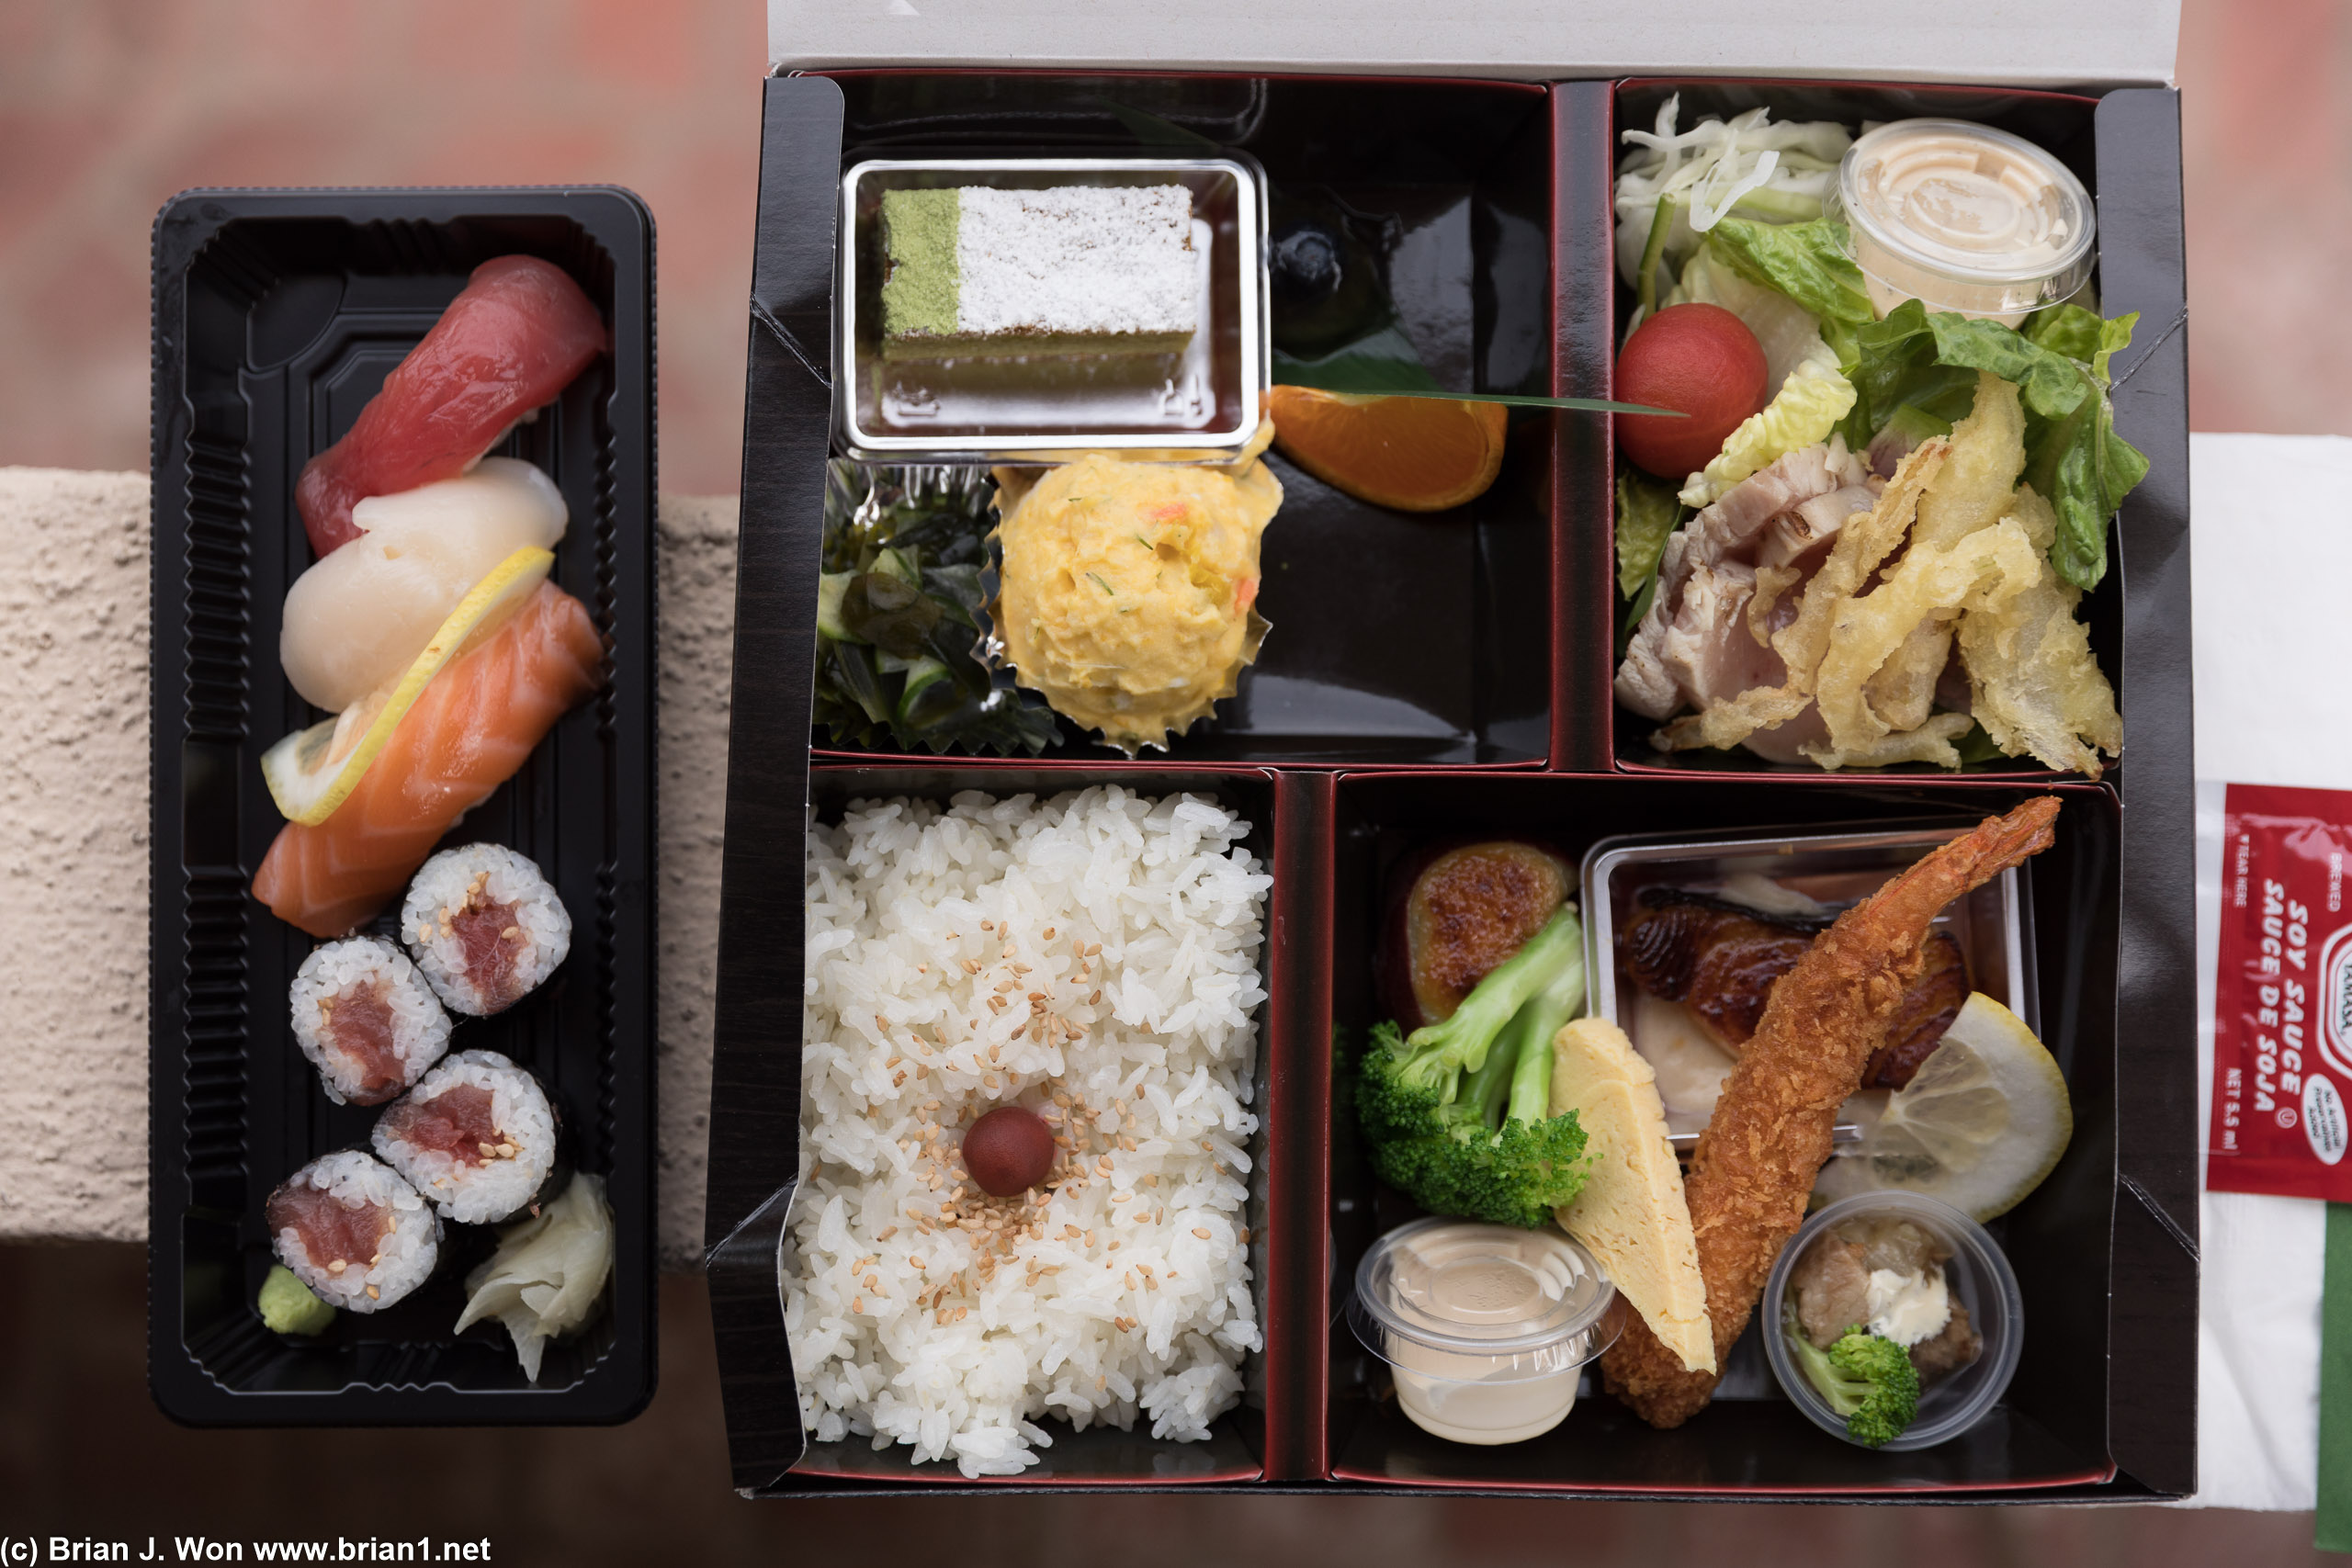 How can a $38 bento box be this elegant?